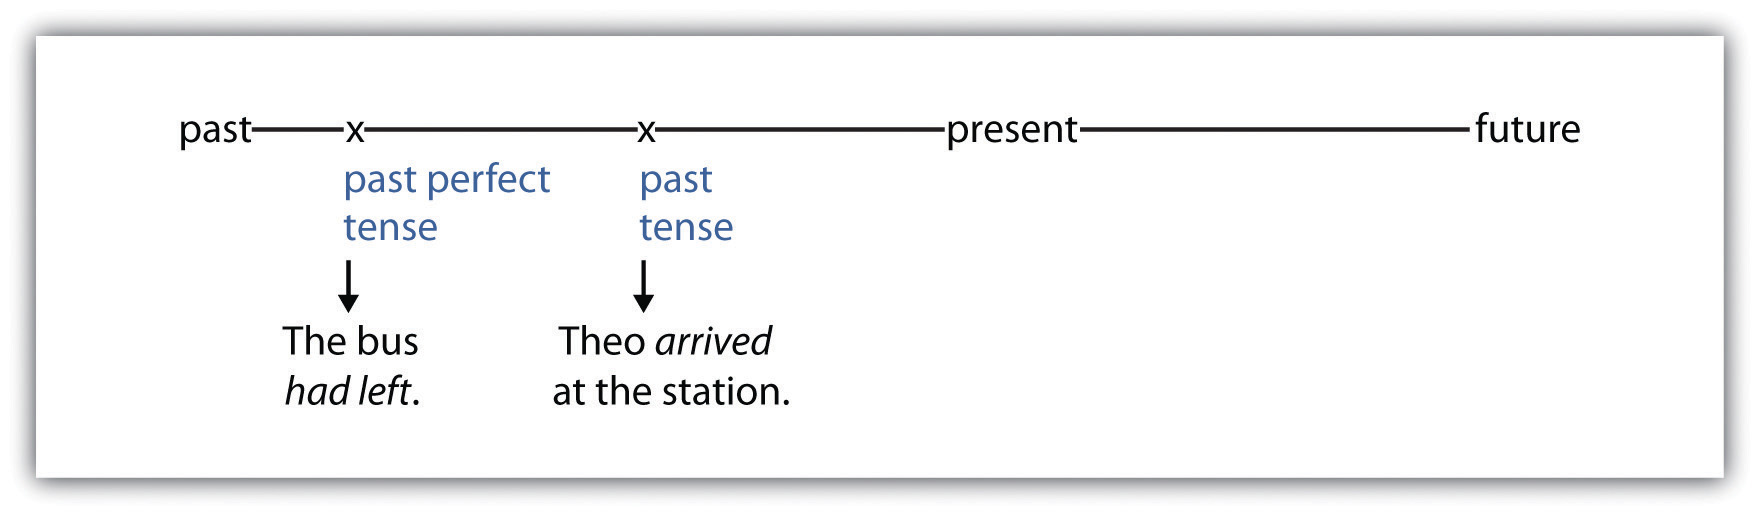 The bus had left (past perfect tense). Theo arrived at the station (past tense).